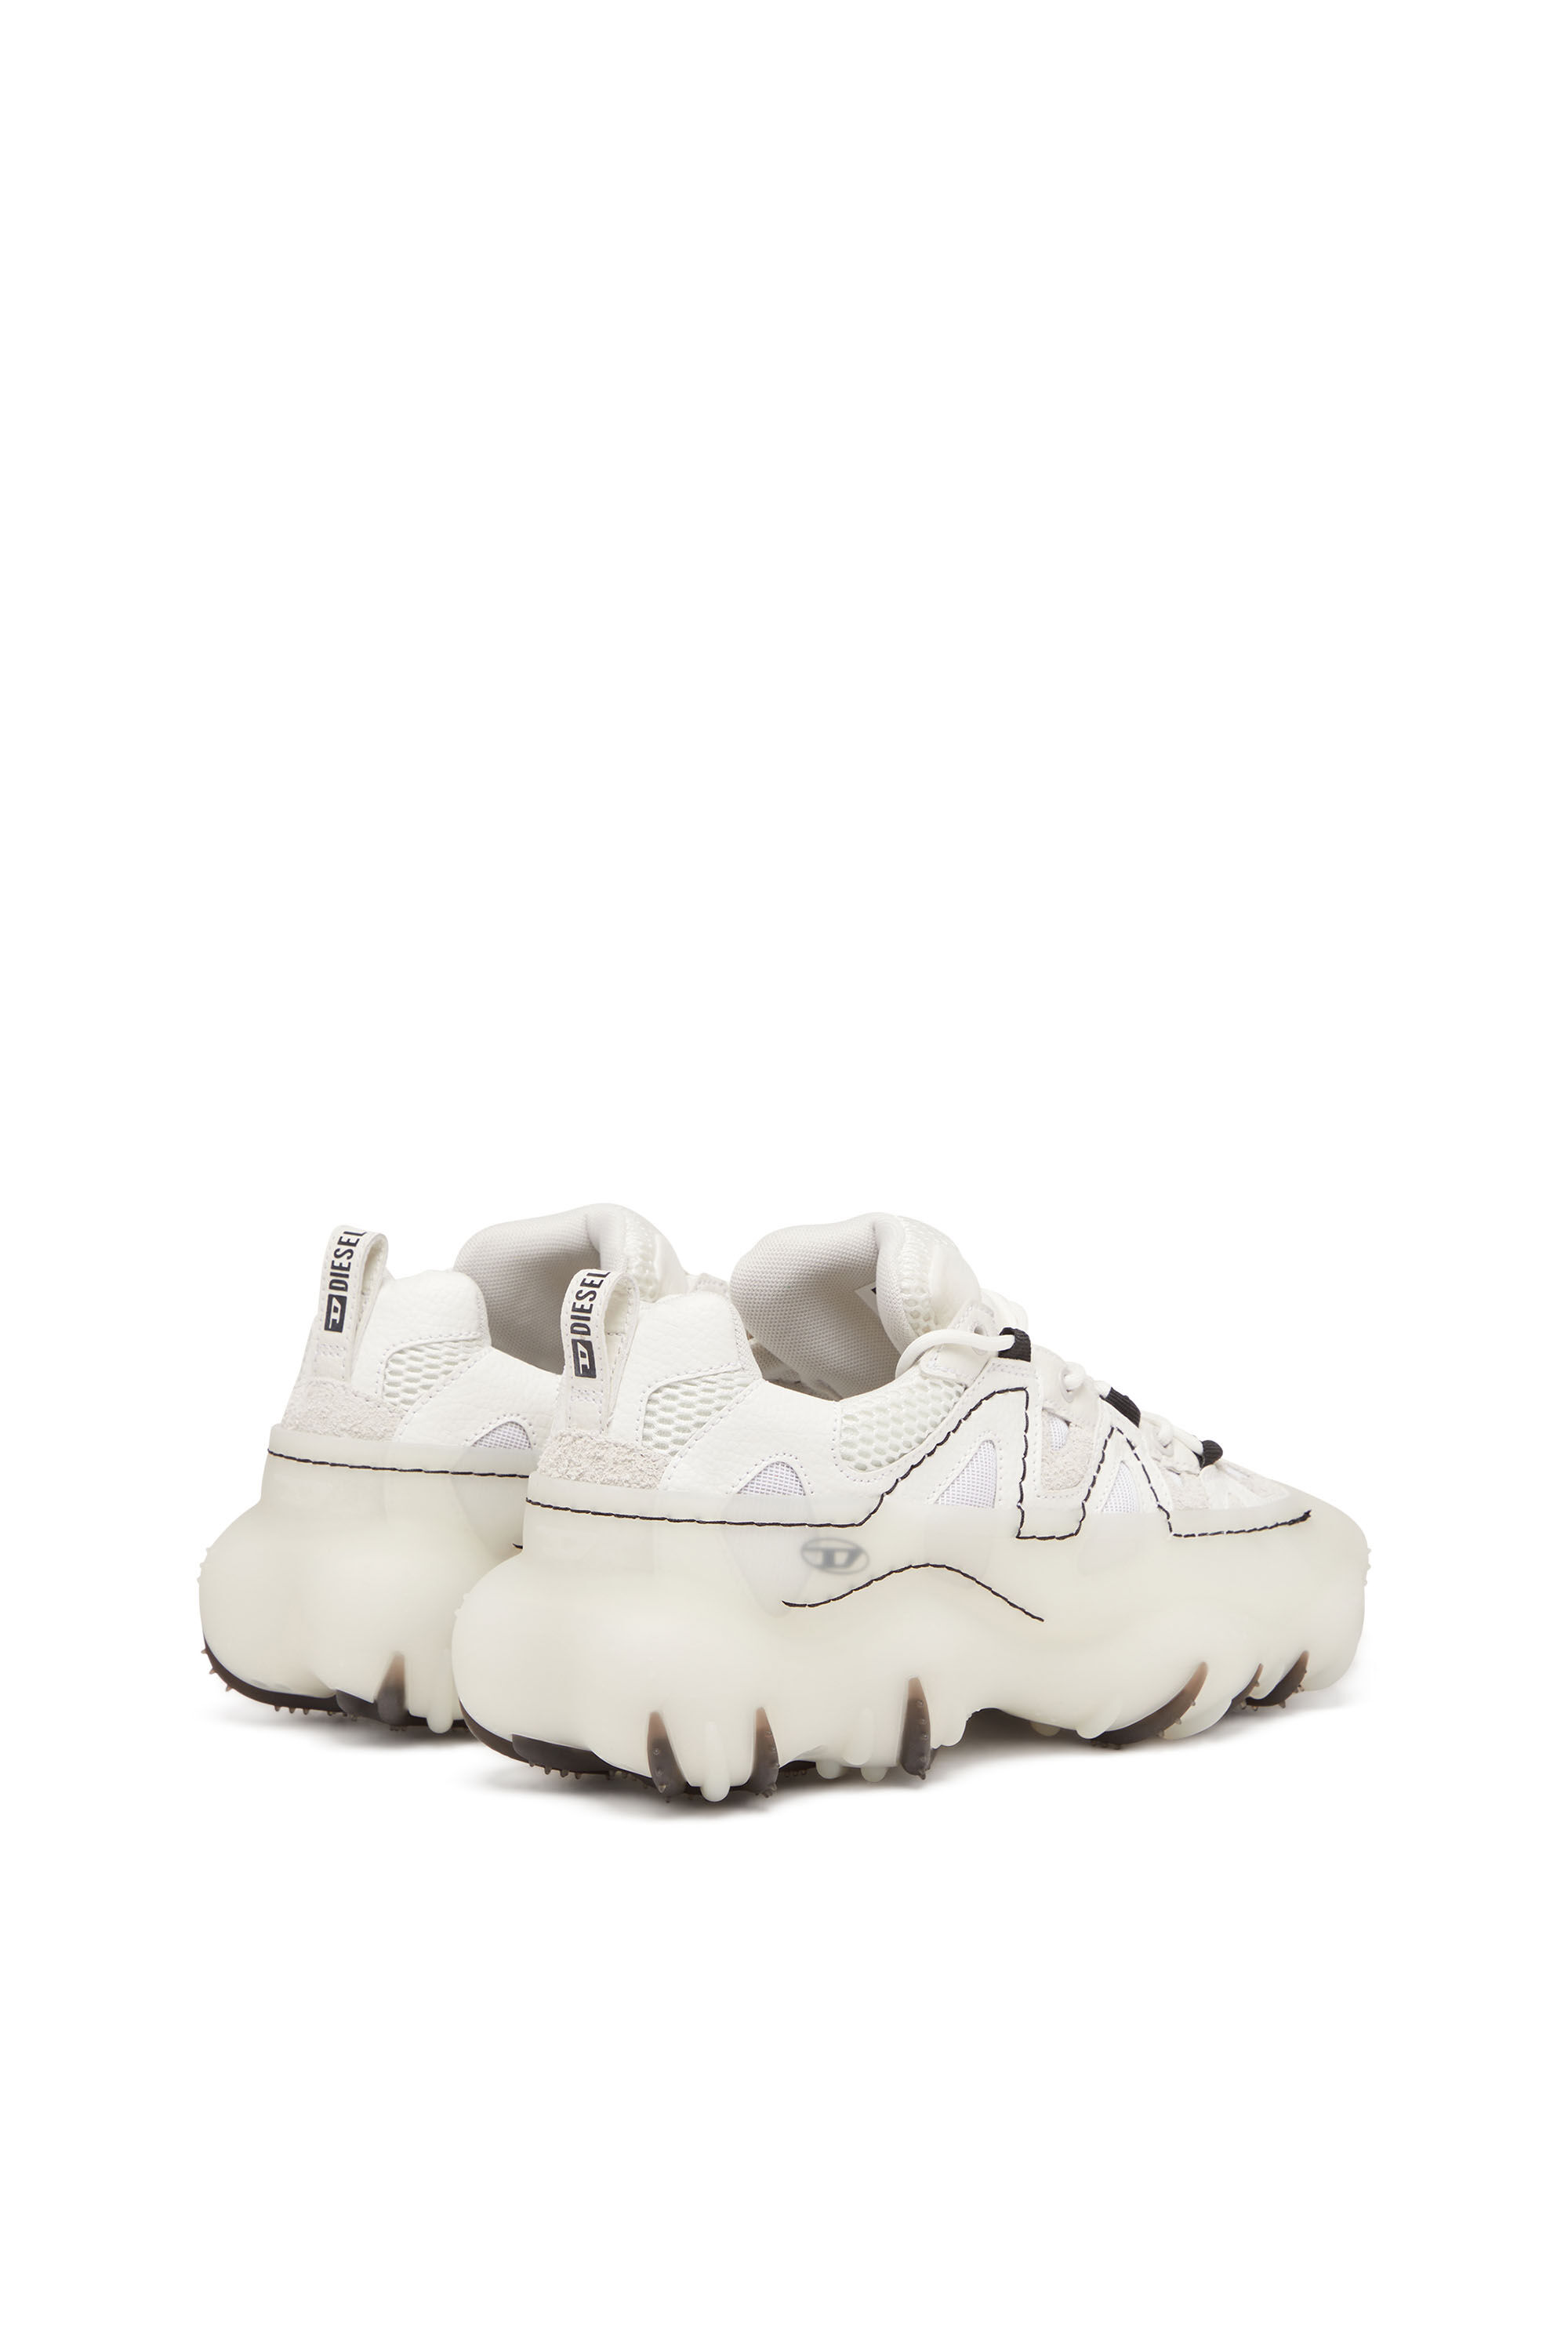 Diesel - S-PROTOTYPE P1, Man S-Prototype P1-Low-top sneakers with rubber overlay in White - Image 3